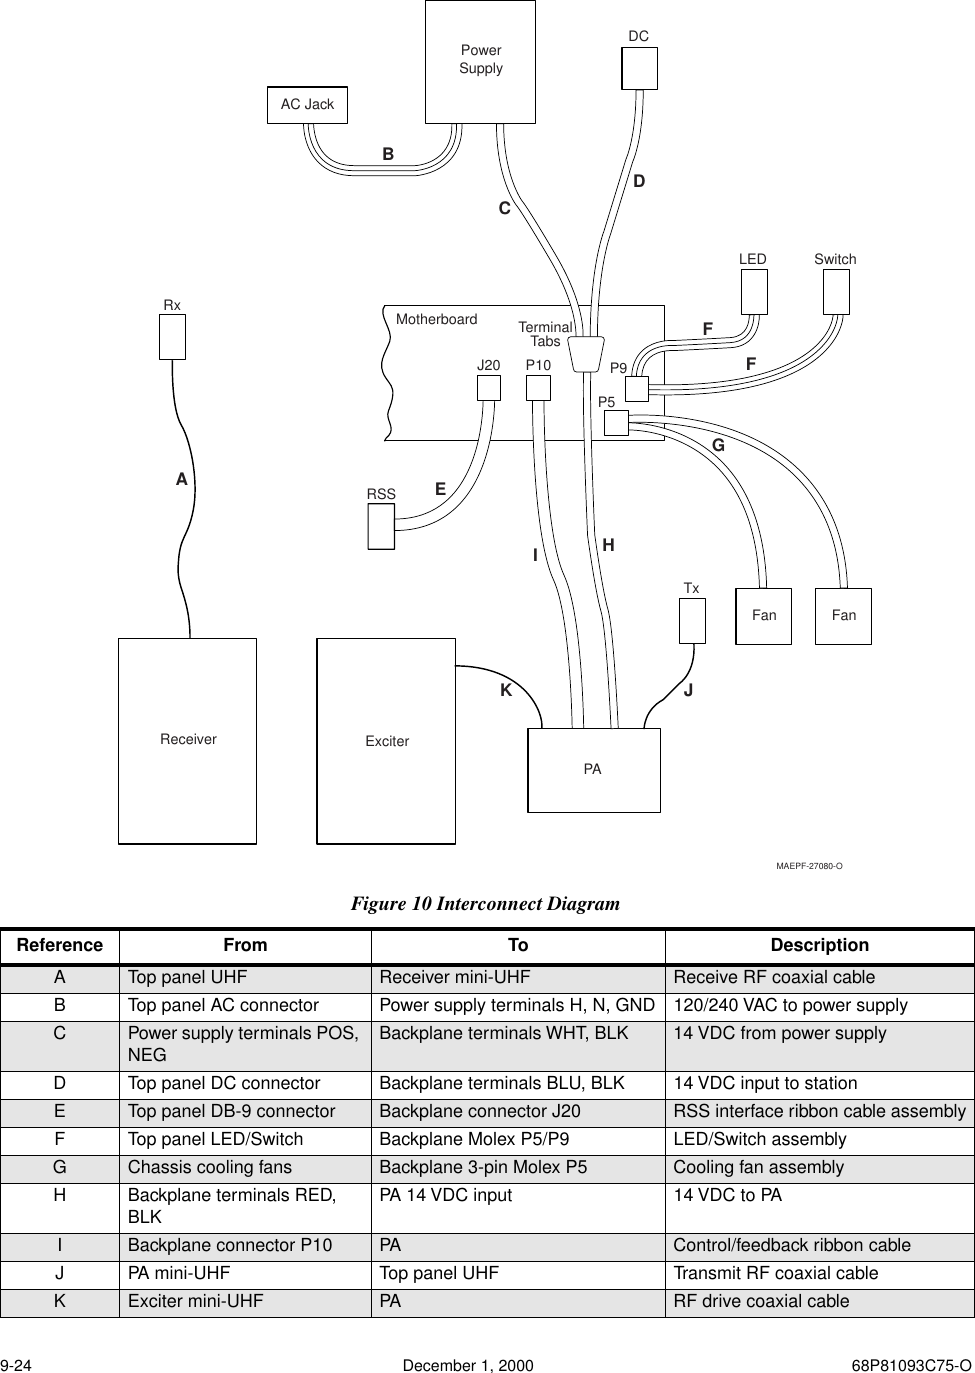 9-24 December 1, 2000 68P81093C75-O Figure 10 Interconnect DiagramReference From To DescriptionA Top panel UHF Receiver mini-UHF Receive RF coaxial cableB Top panel AC connector Power supply terminals H, N, GND 120/240 VAC to power supplyCPower supply terminals POS, NEG Backplane terminals WHT, BLK 14 VDC from power supplyD Top panel DC connector Backplane terminals BLU, BLK 14 VDC input to stationE Top panel DB-9 connector Backplane connector J20 RSS interface ribbon cable assemblyF Top panel LED/Switch Backplane Molex P5/P9 LED/Switch assemblyG Chassis cooling fans Backplane 3-pin Molex P5 Cooling fan assemblyH Backplane terminals RED, BLK PA 14 VDC input 14 VDC to PAI Backplane connector P10 PA Control/feedback ribbon cableJ PA mini-UHF Top panel UHF Transmit RF coaxial cableK Exciter mini-UHF PA RF drive coaxial cableAC JackPowerSupplyMotherboardDCRxTxRSSP5P9JKGHIDEFFABCReceiver ExciterPAFan FanSwitchLEDTerminalTabsJ20 P10MAEPF-27080-O